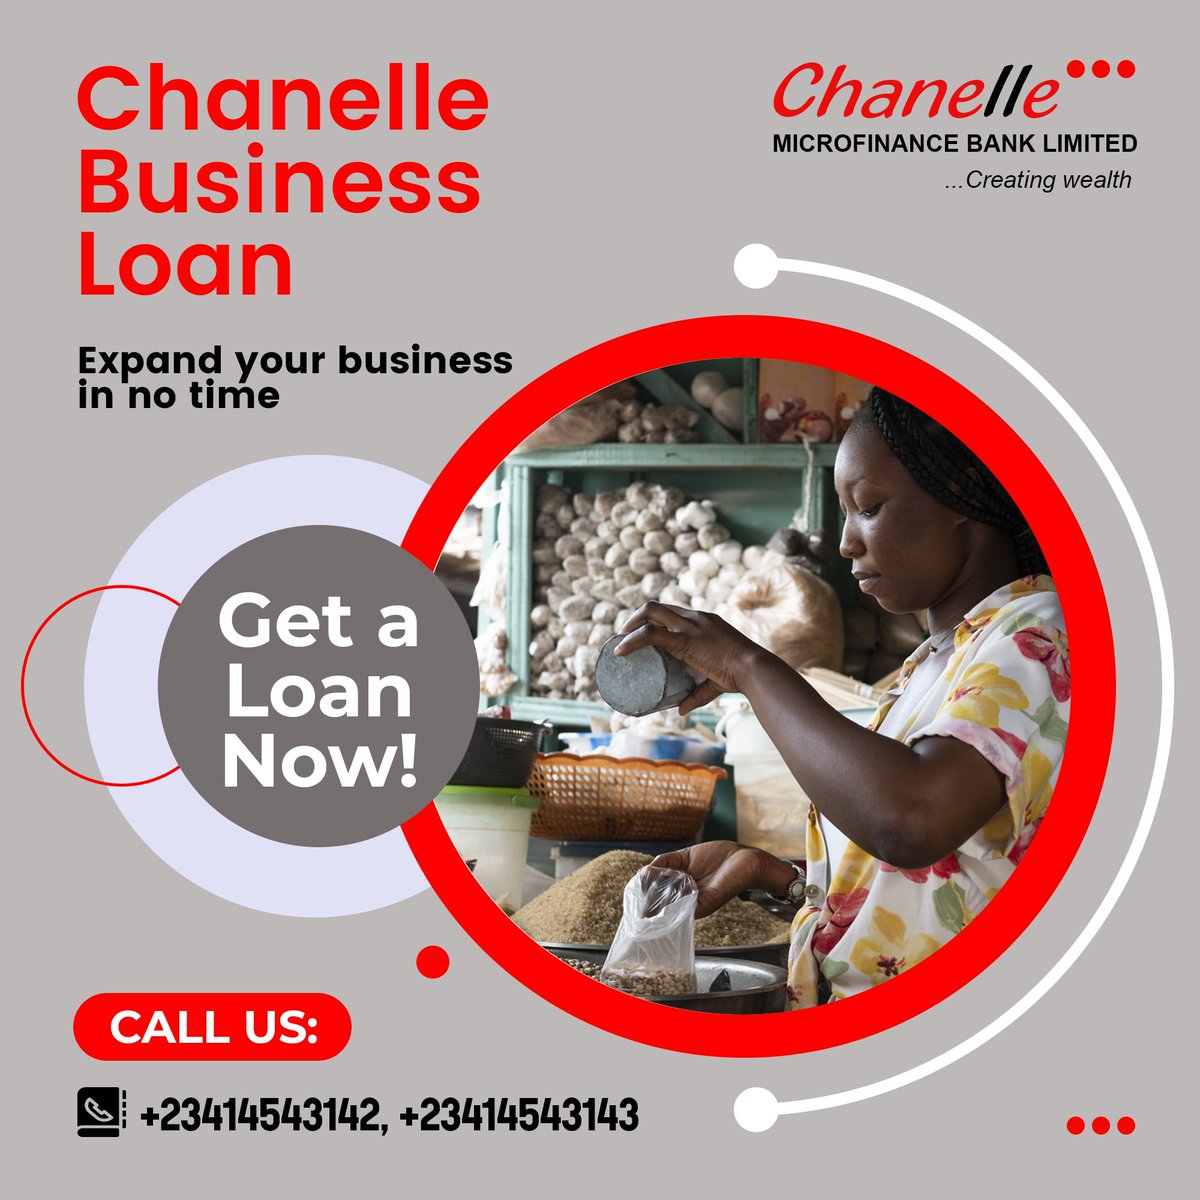 It is not the strongest species that survive, nor the most intelligent, but the most responsive to change.
Please note: Do not disclose your PINs, passwords, OTPs, and other personal banking details to anyone as Chanelle MFB will never ask for these details.
#promotingbusiness